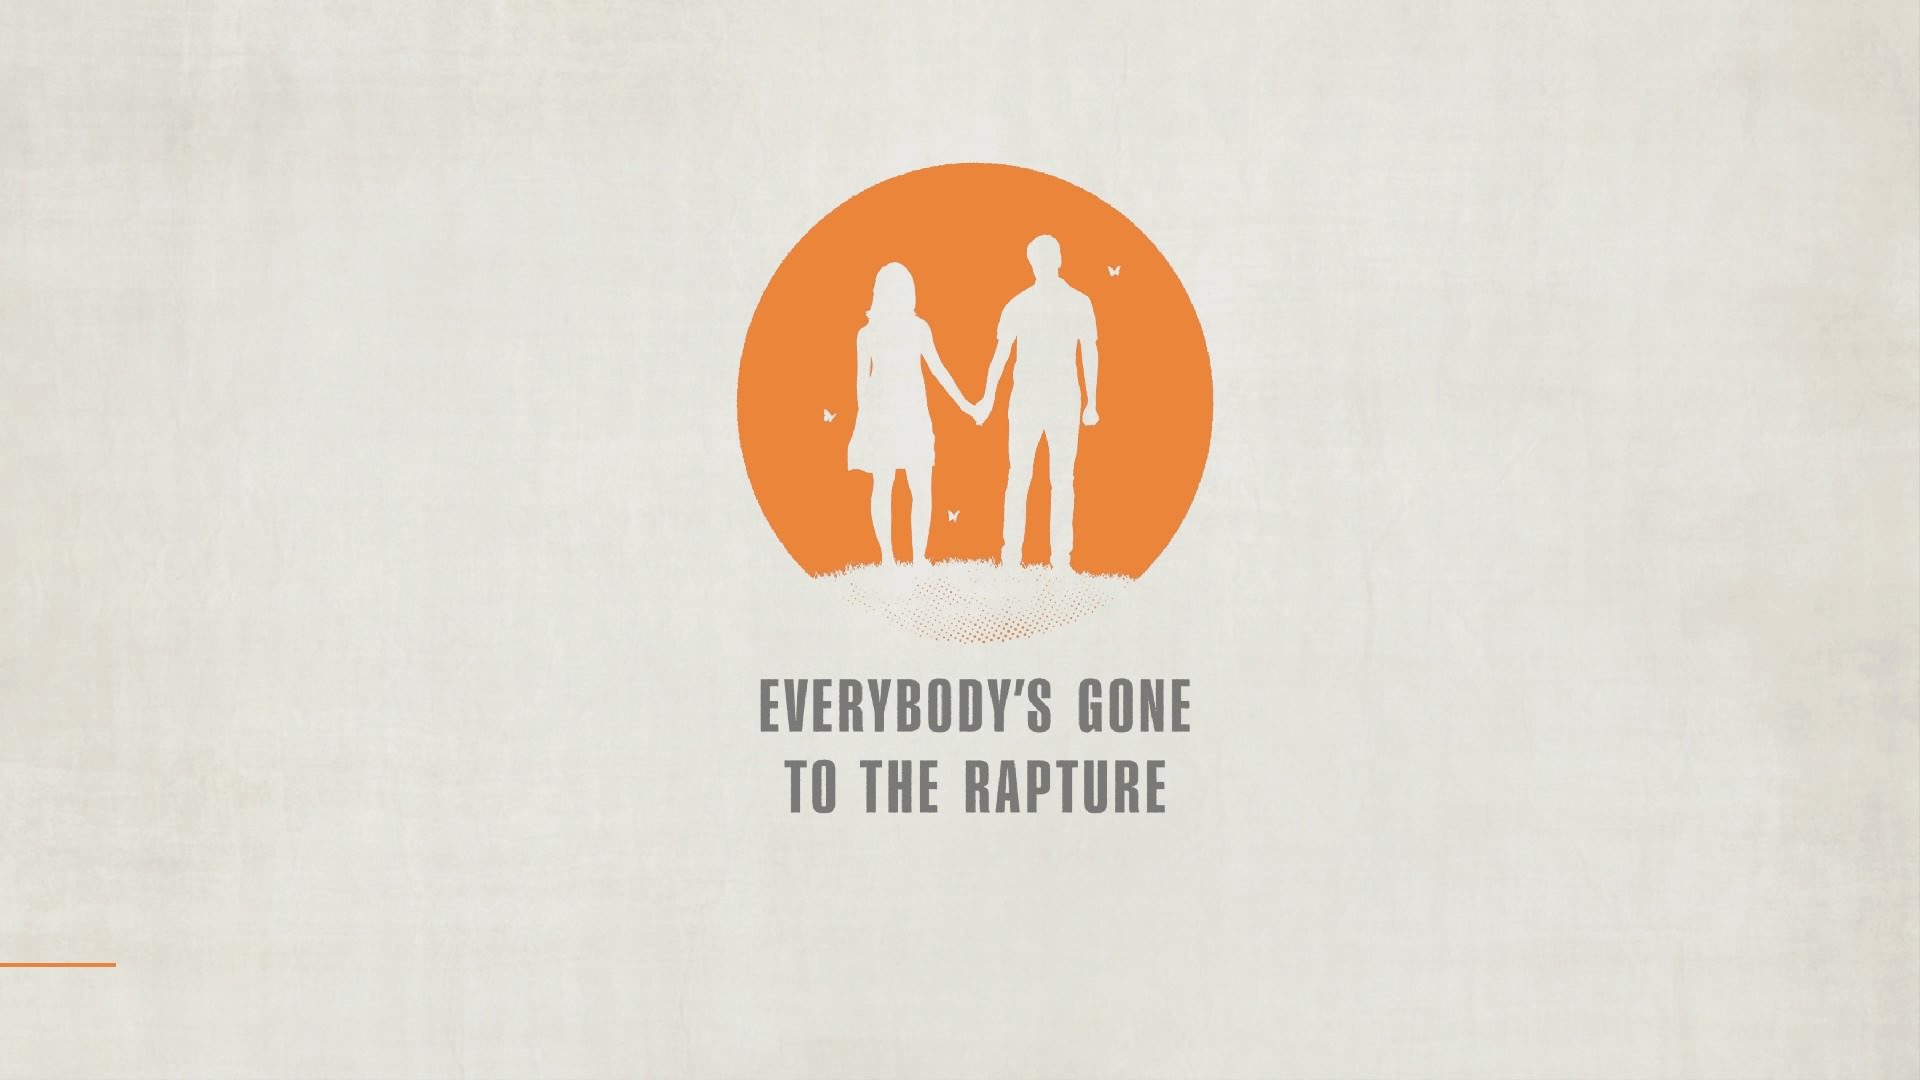 Everybody s world. Everybody’s gone to the Rapture. Everybody's gone to the Rapture (2015). Everybody's gone to the Rapture логотип. Everybody going to the Rapture.